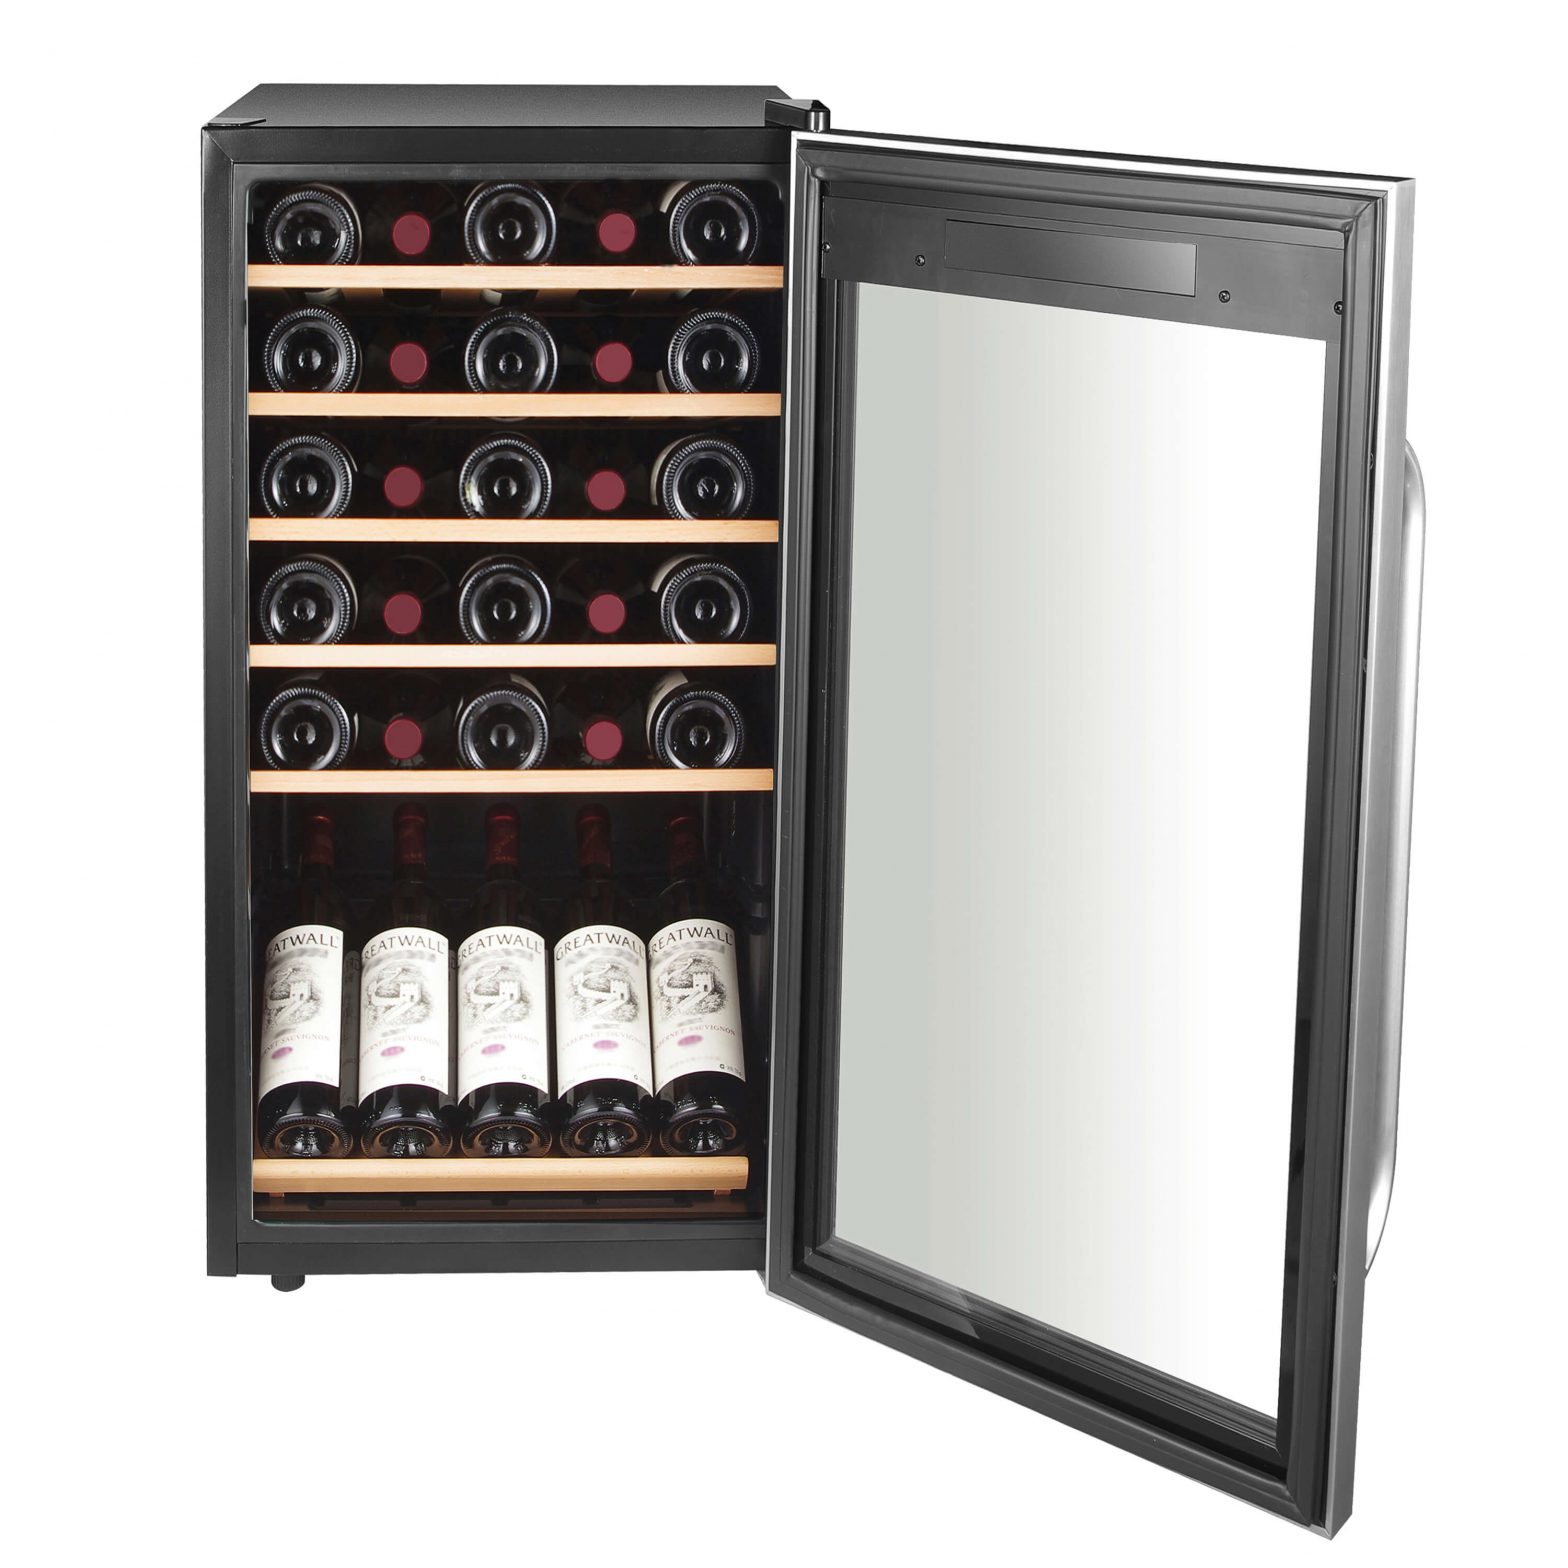 Whynter 34 Bottle Freestanding Stainless Steel Wine Refrigerator with Display Shelf and Digital Control FWC-341TS User Manual